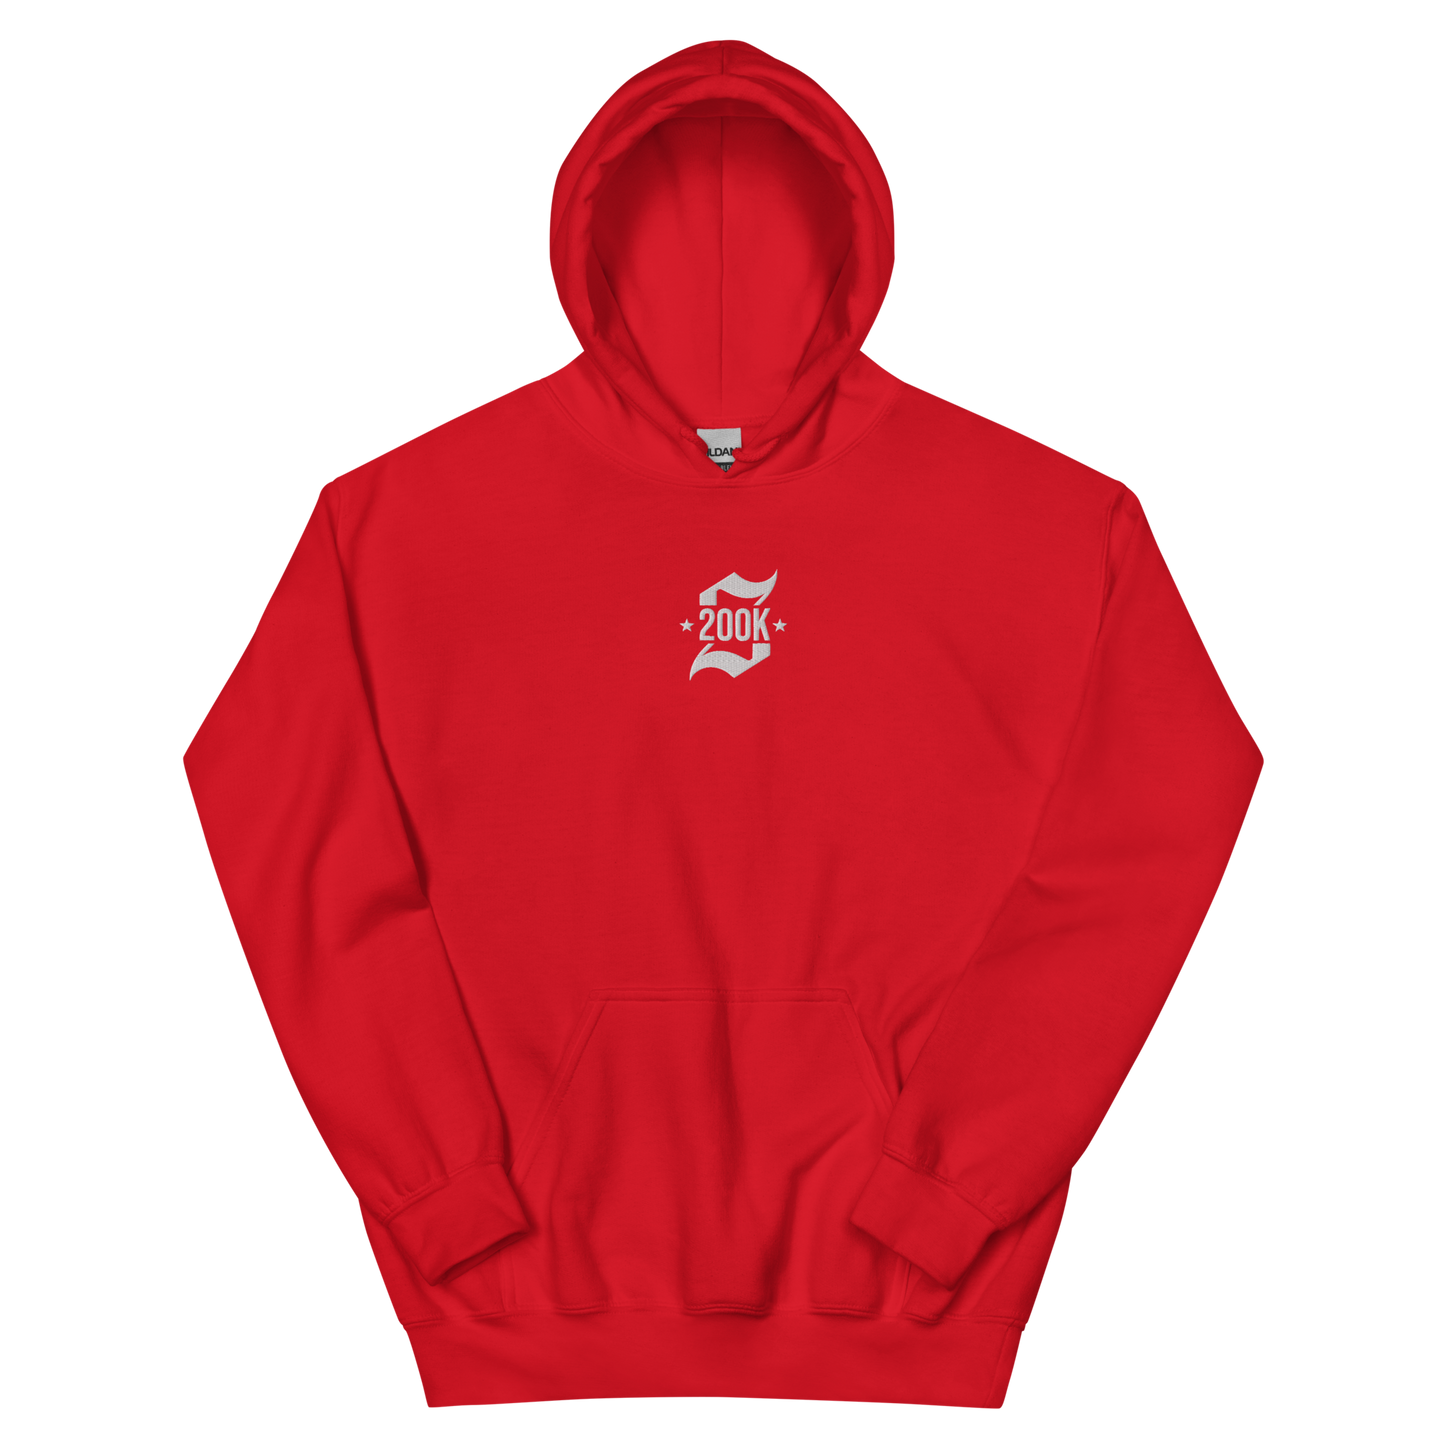 shots 200K Hoodie (Red / Embroidered)